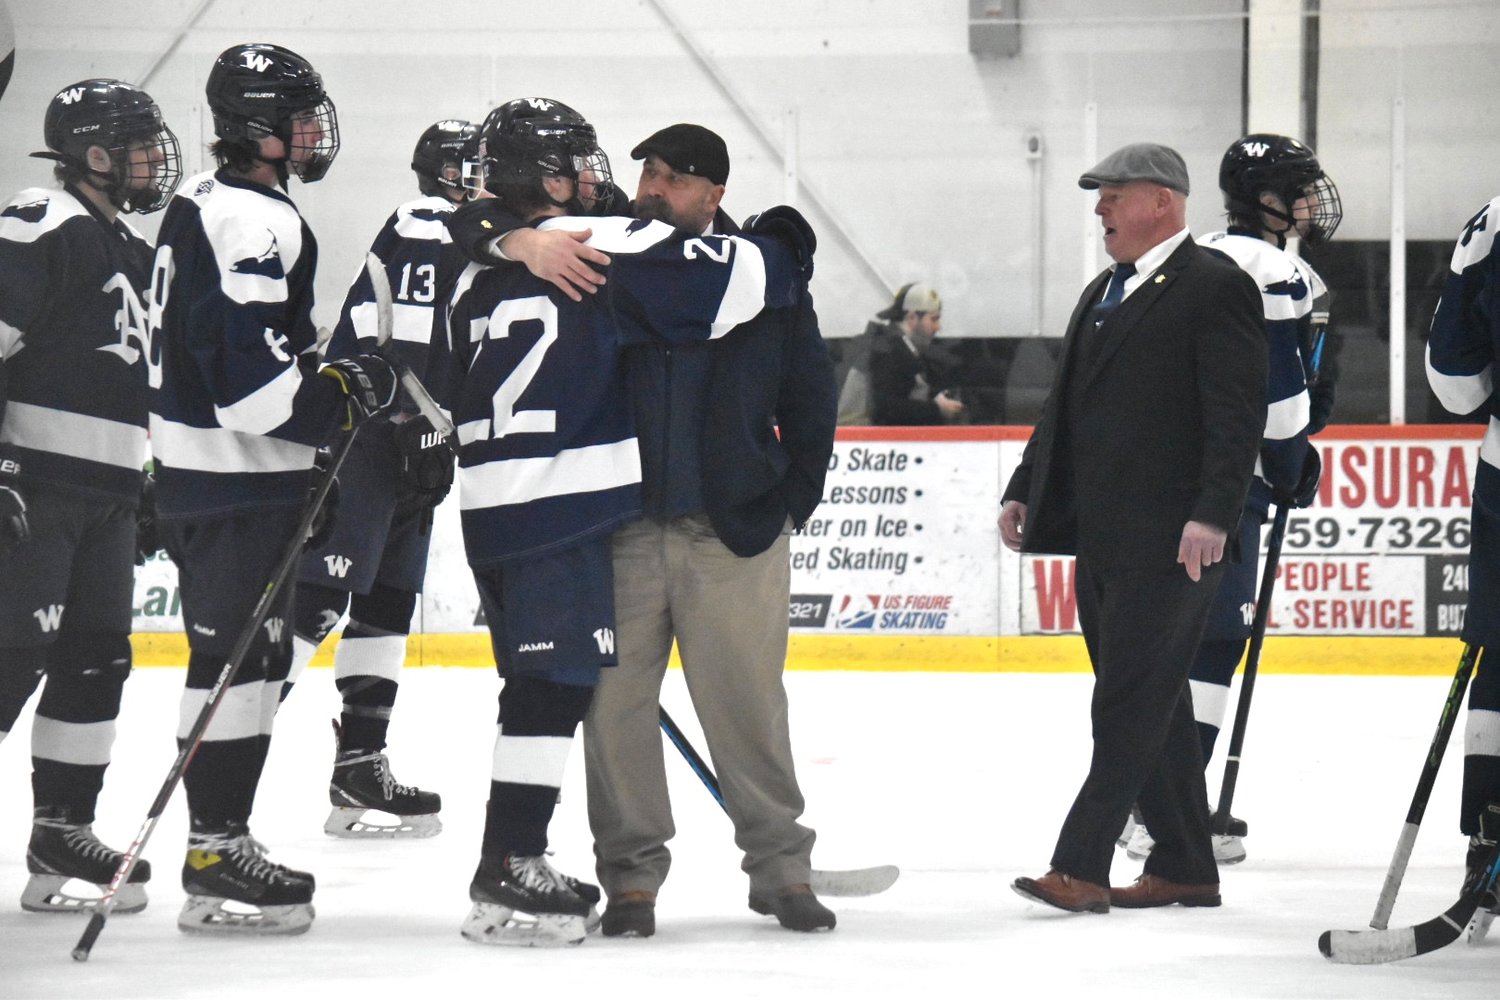 Soren Edwardes (22) and assistant coach Ray Patrick hug after Saturday's game against Sandwich.